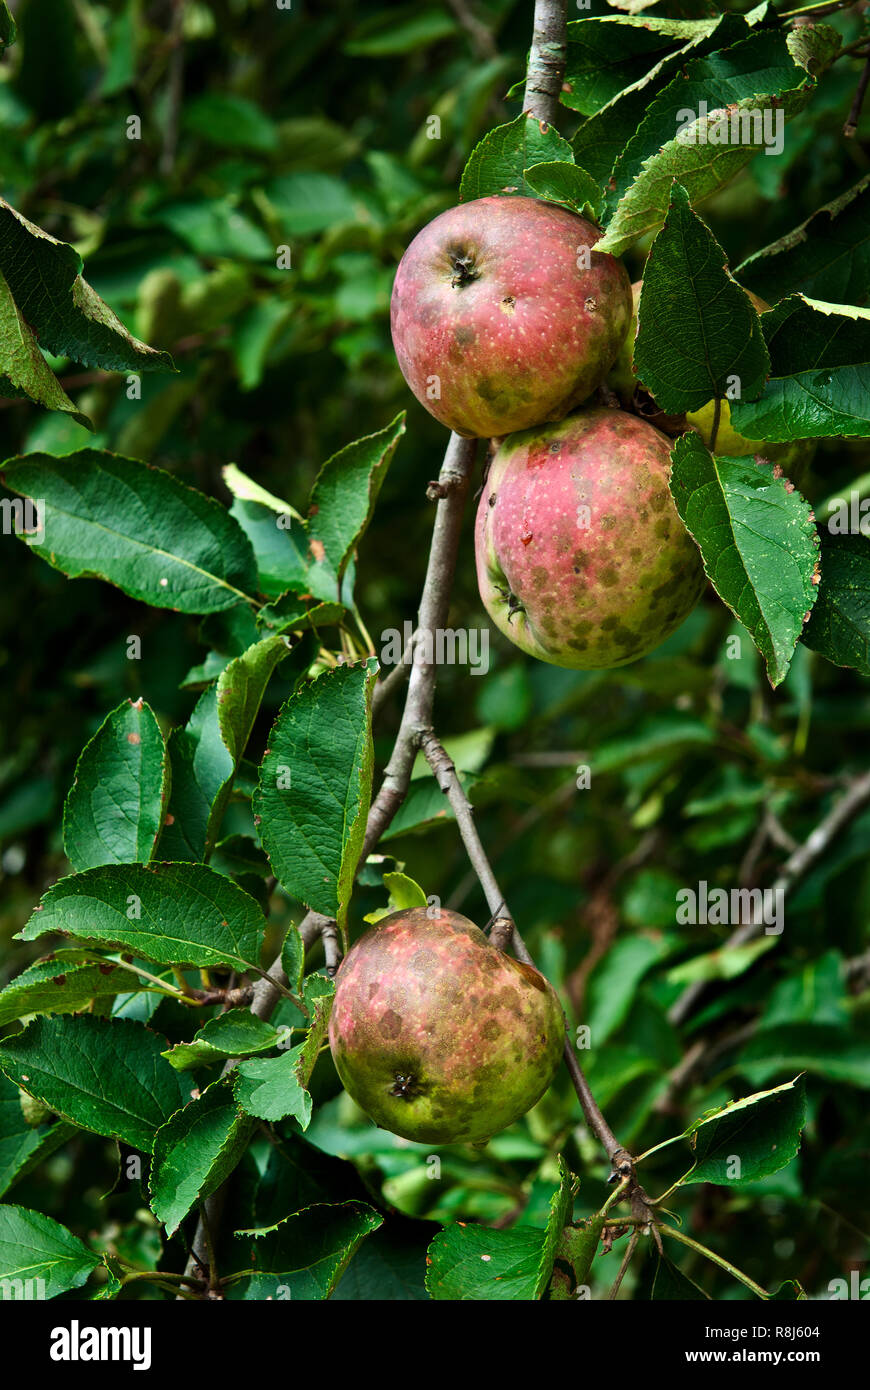 Apples ripening on old tree in central Virginia. Tree has not been sprayed with pesticides or fungicides, so apples have developed a fungal disease ca Stock Photo